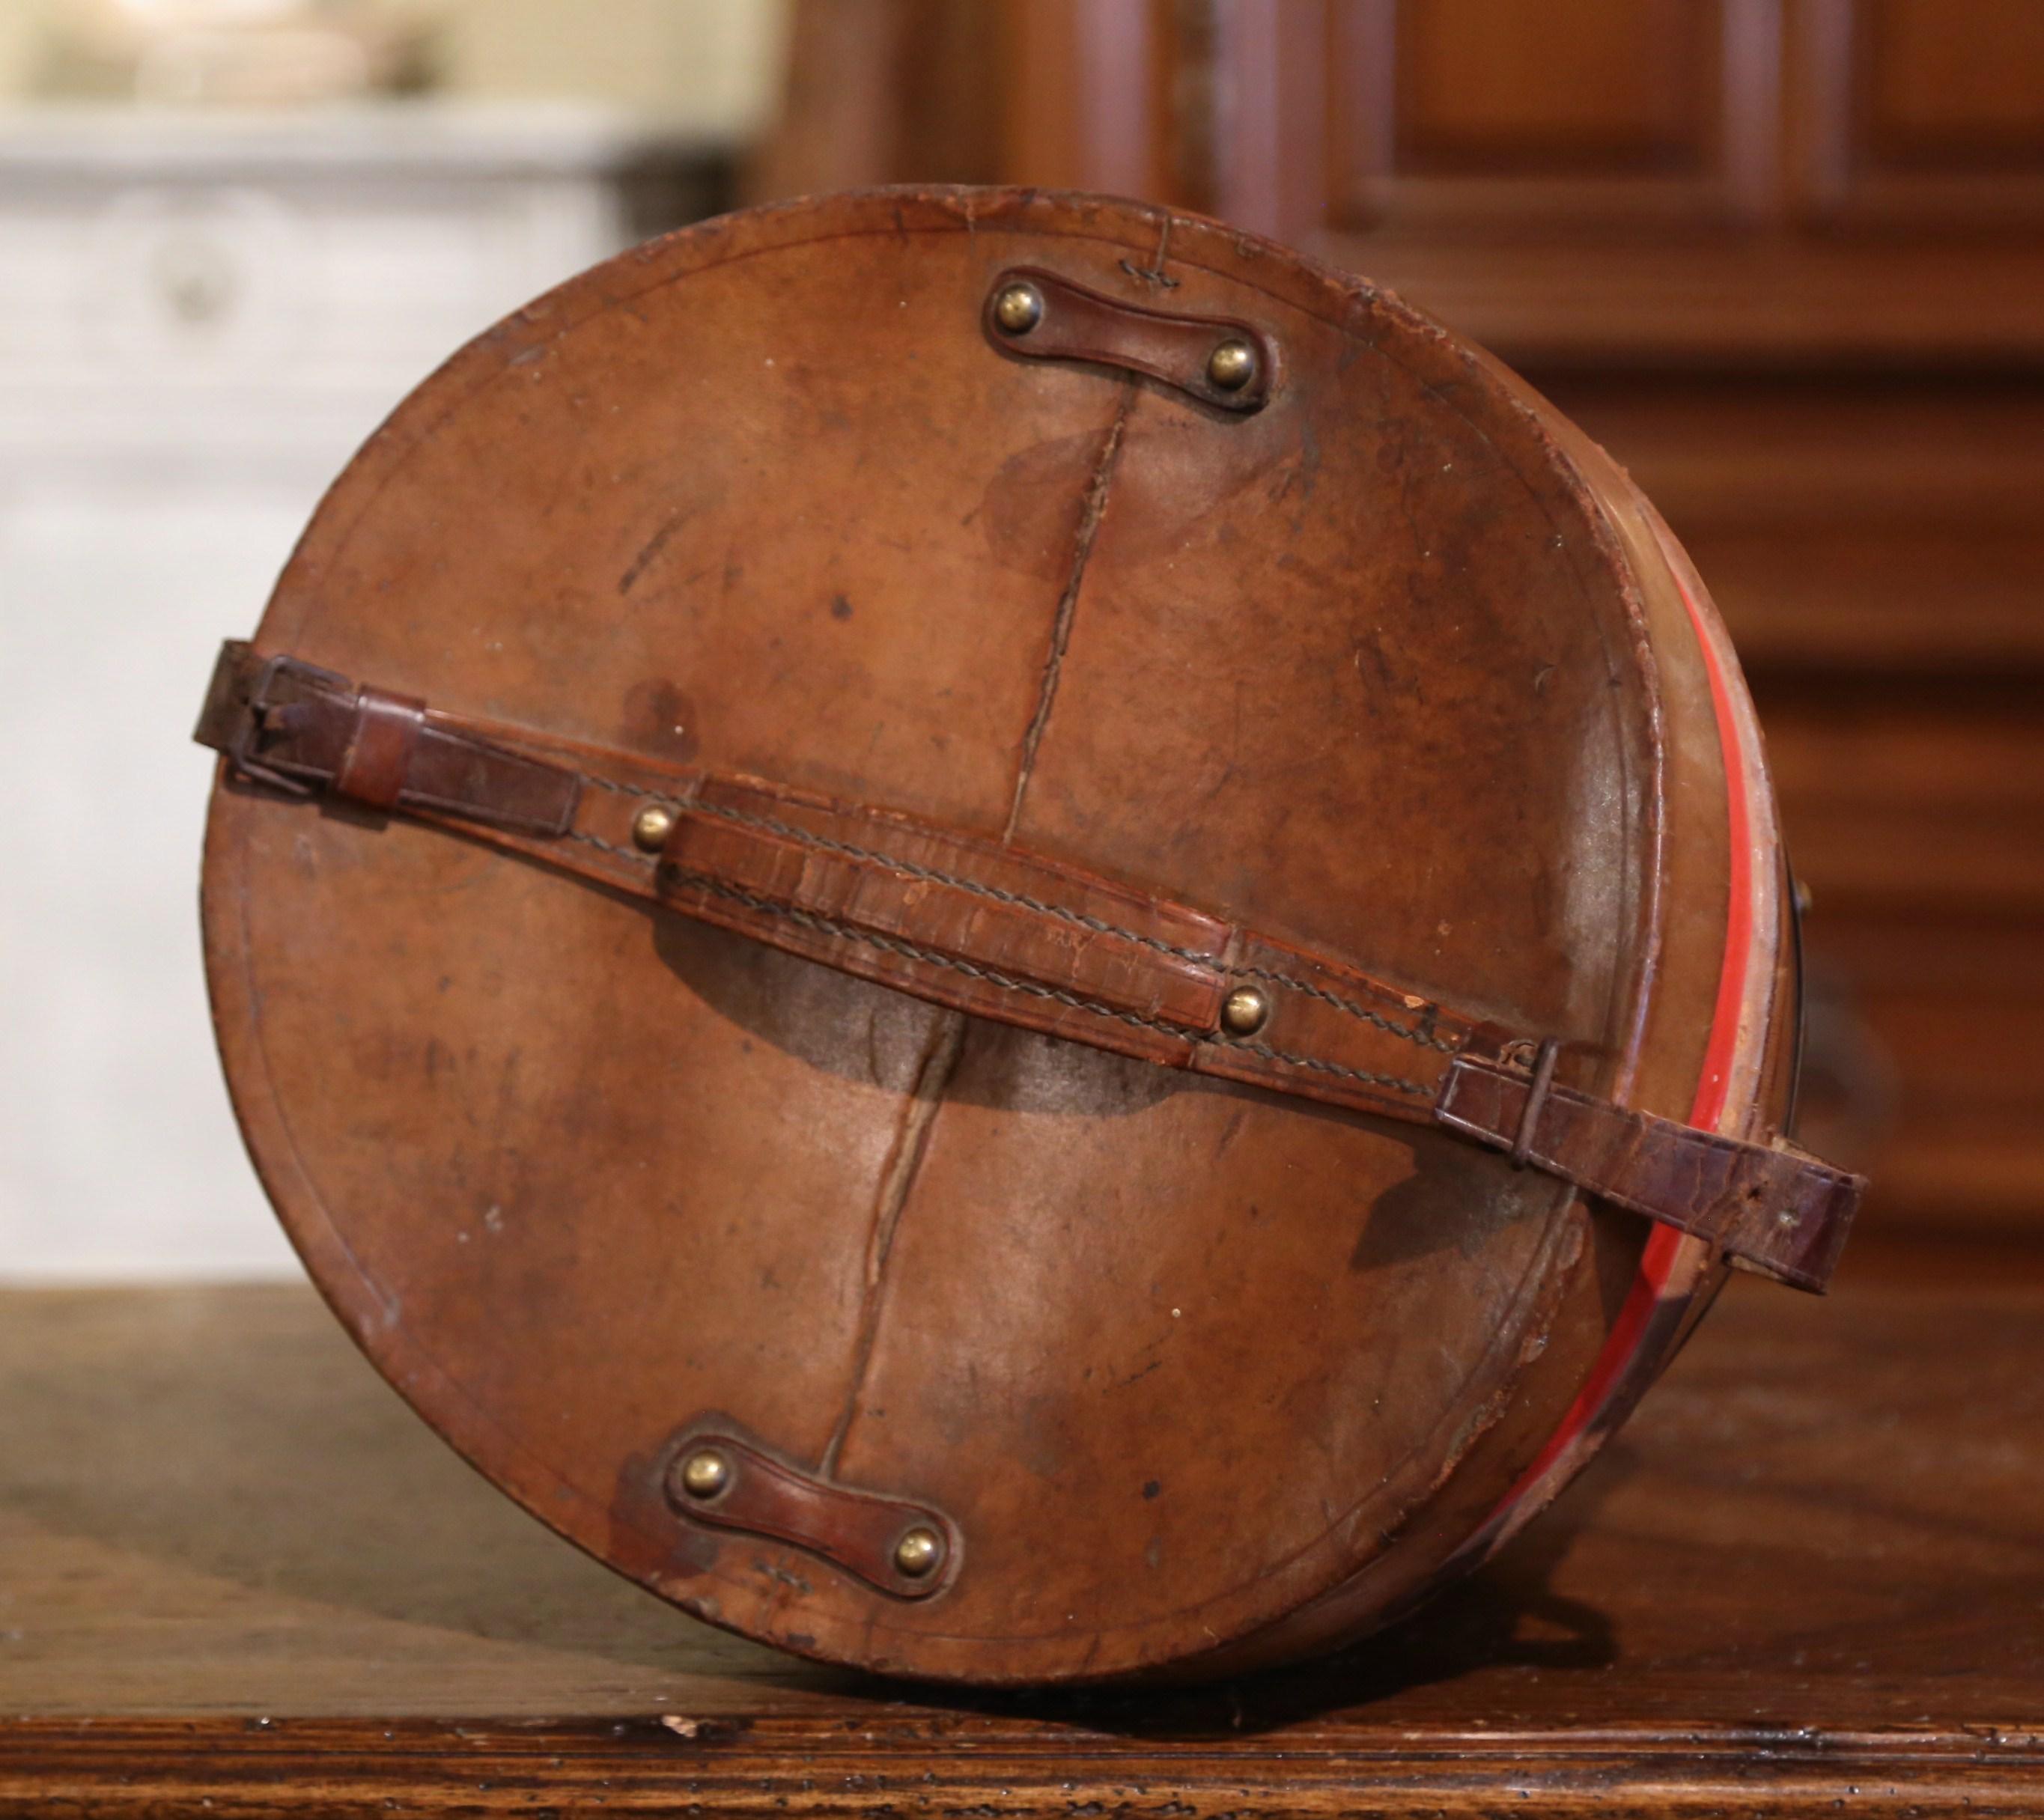 Hand-Crafted Mid-19th Century French Oval Pigskin Leather Hat Box with Original Top Hat For Sale